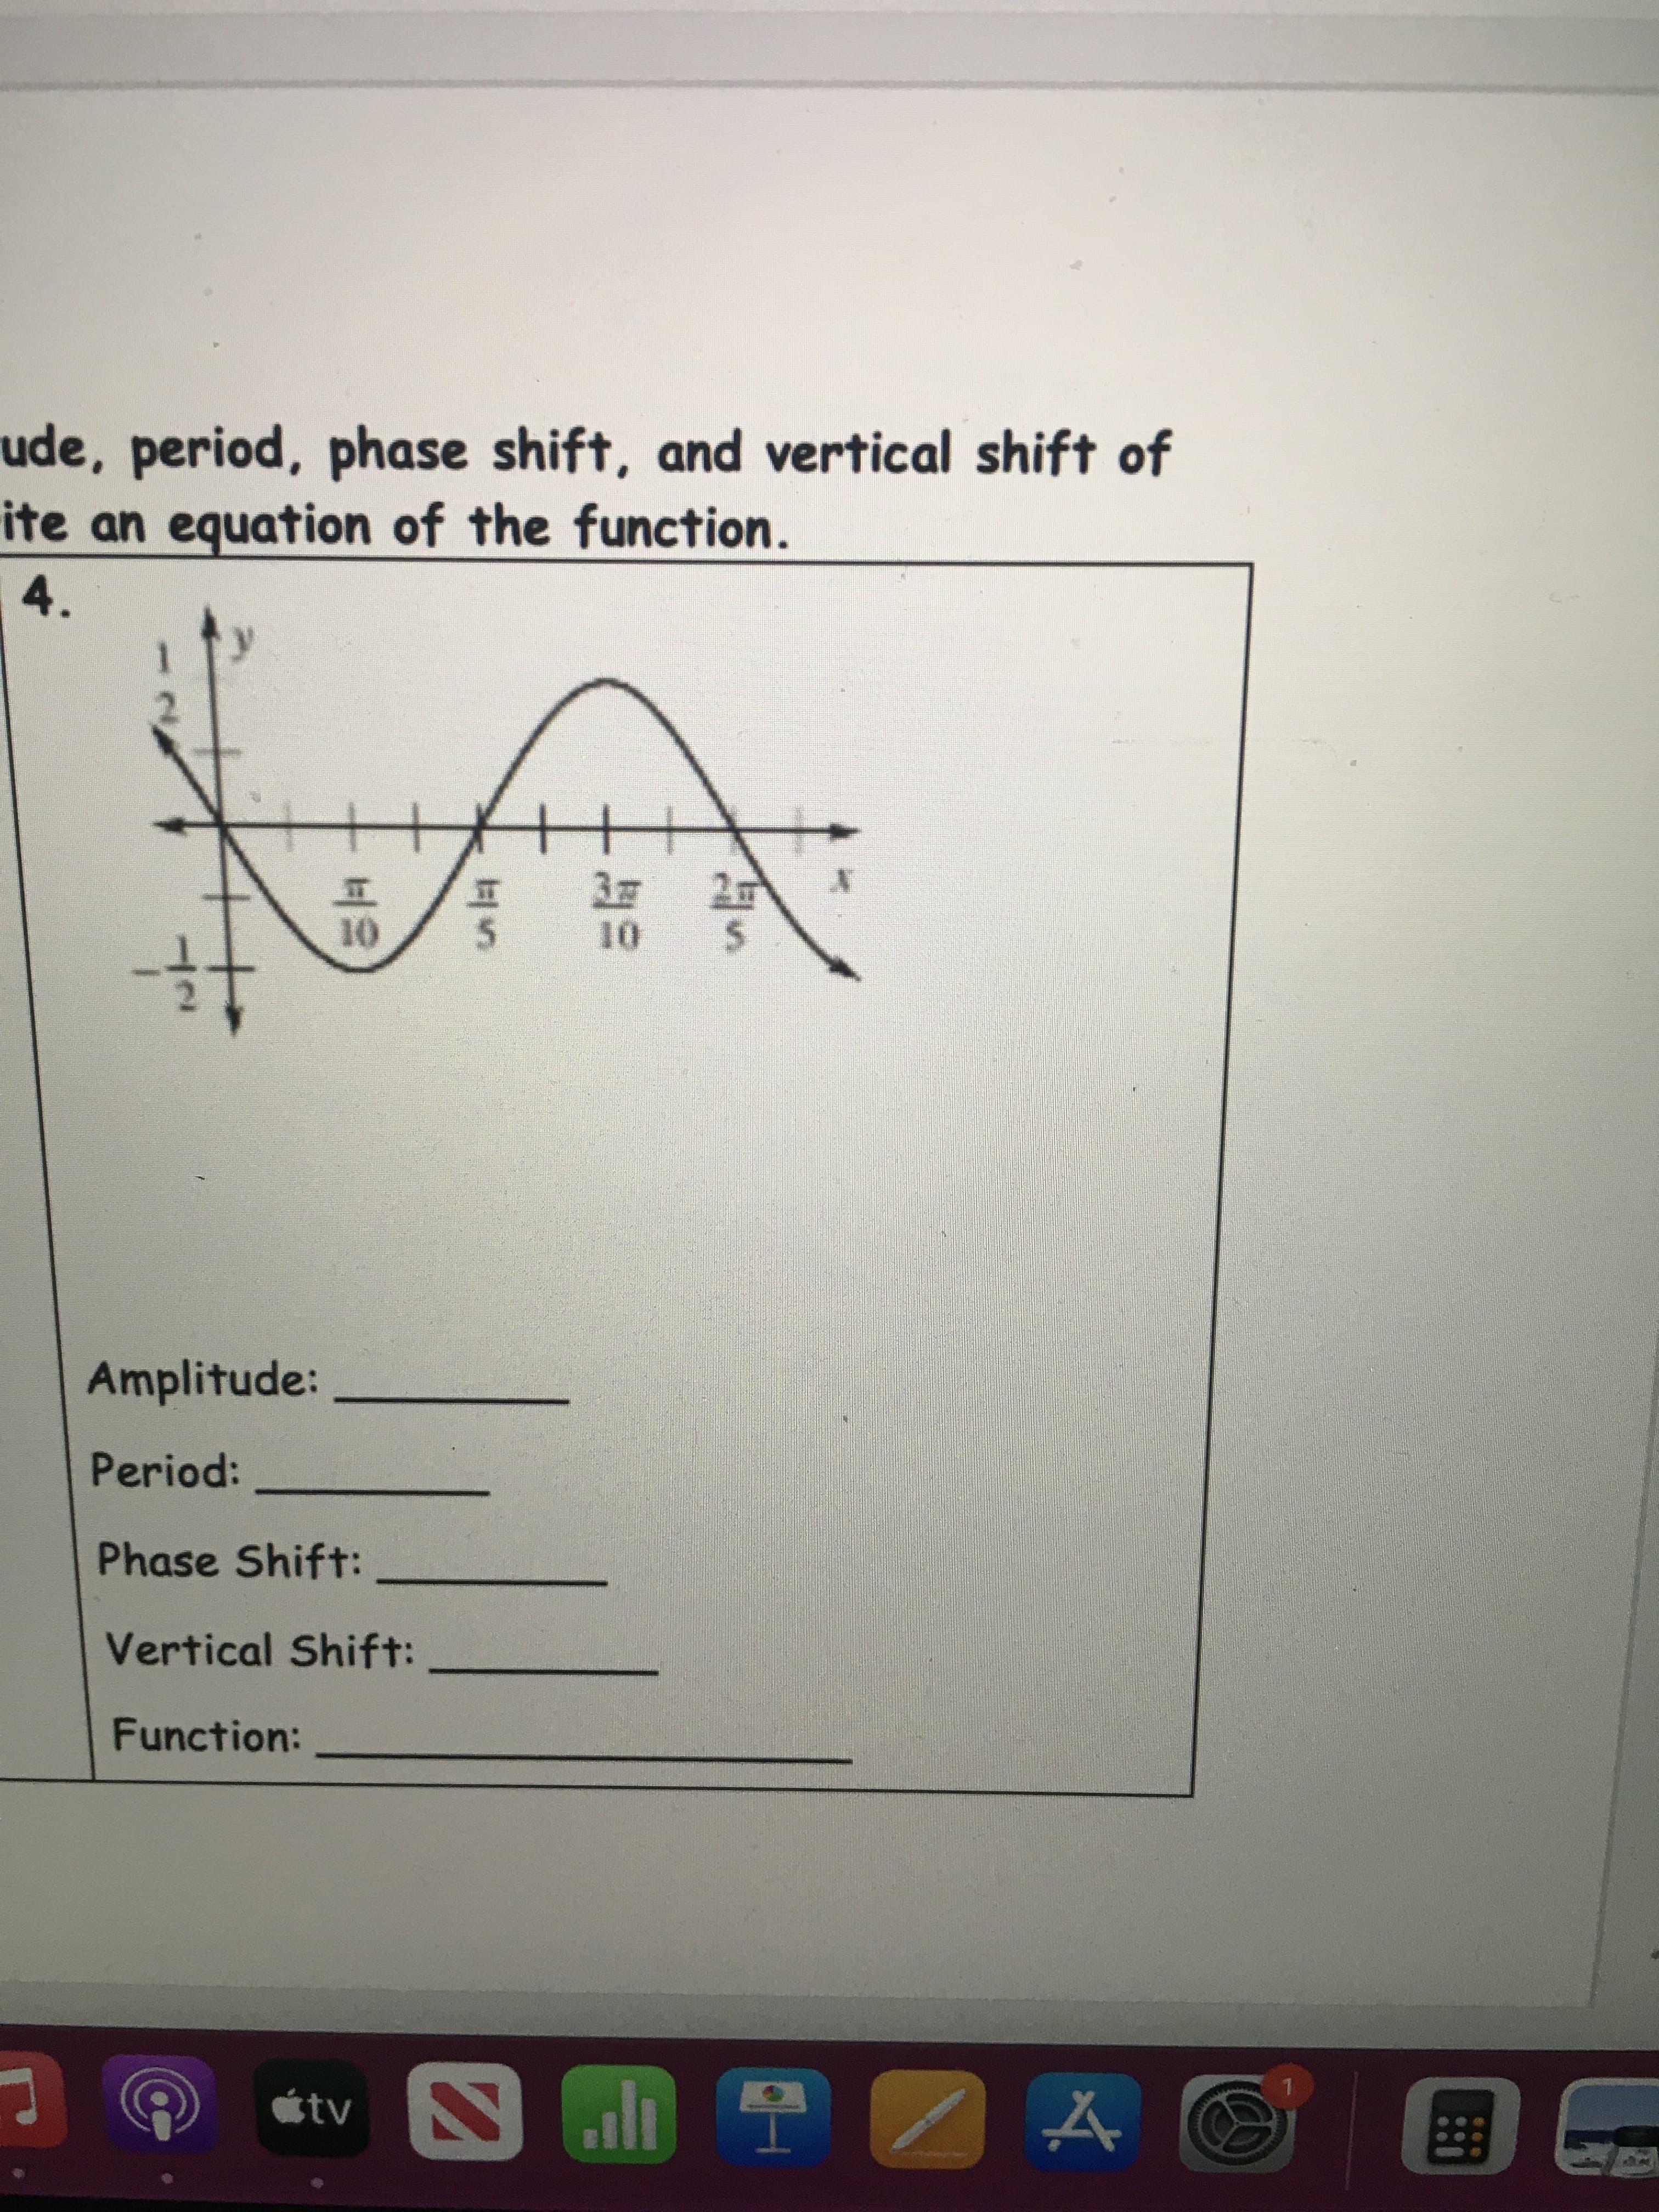 ude, period, phase shift, and vertical shift of
ite an equation of the function.
4.
5.
Amplitude:
Period:
Phase Shift:
Vertical Shift:
Function:
tv
1T S
国
